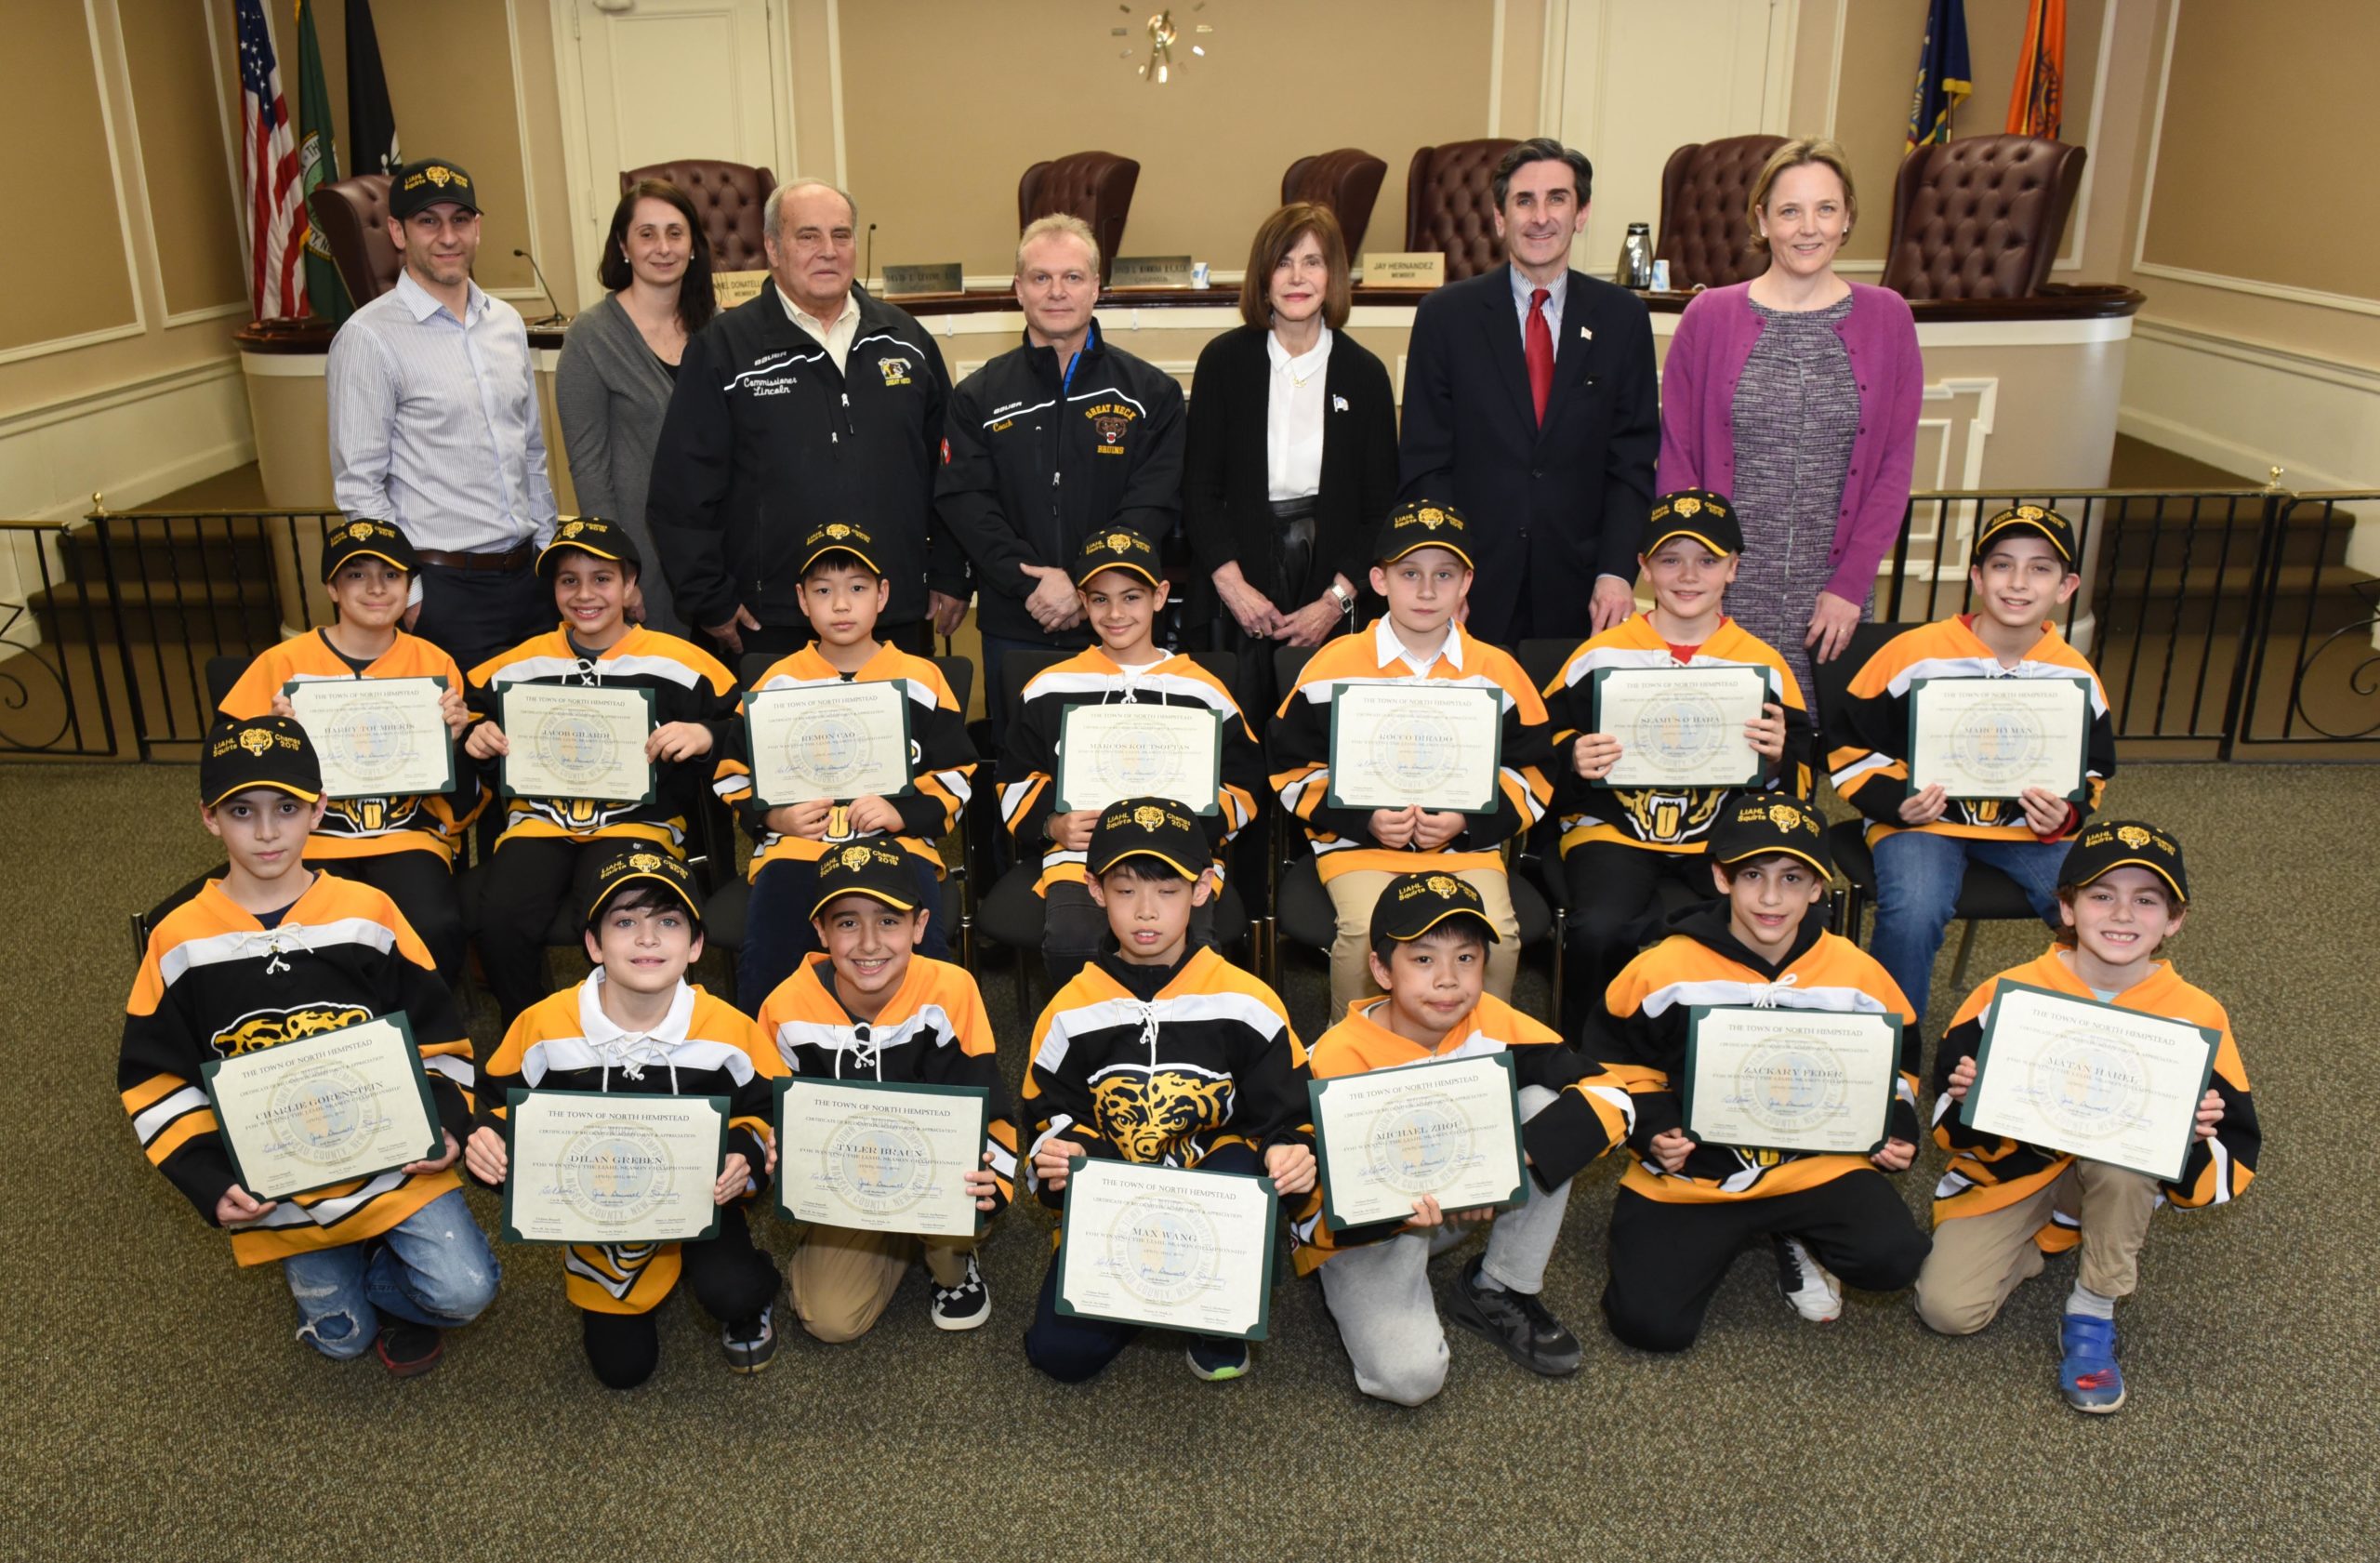 Superintendent Jason R. Marra, Commissioners Tina Stellato, Robert Lincoln, Jr., Frank Cilluffo, Council Member Lee Seeman, Town Clerk Wayne Wink and Council Member Veronica Lurvey are pictured with the victorious Great Neck Bruins. (Photo courtesy of the Town of North Hempstead)